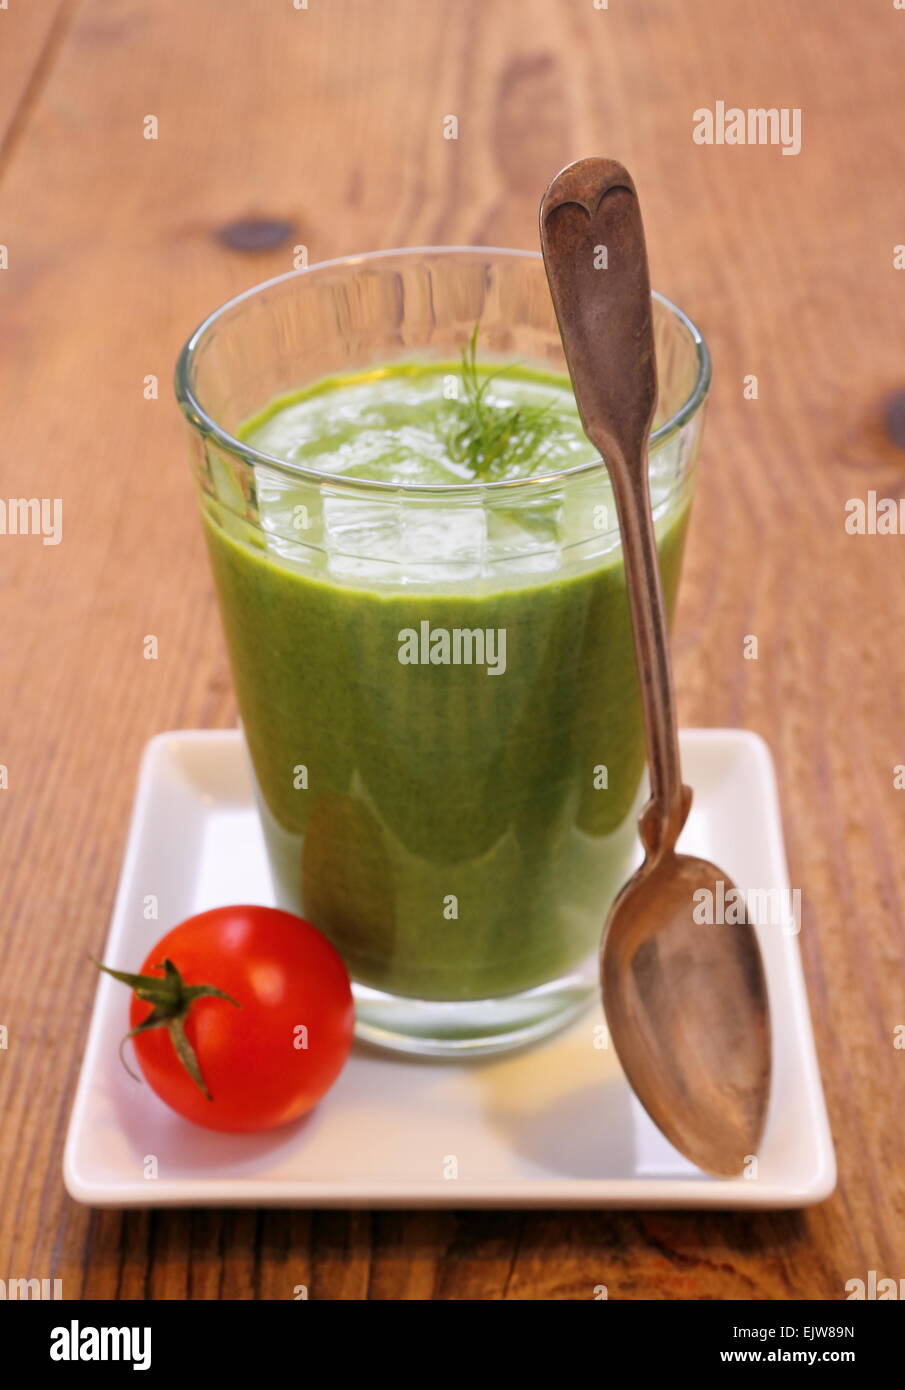 Green spinach smoothie and small red tomato, wooden background Stock Photo